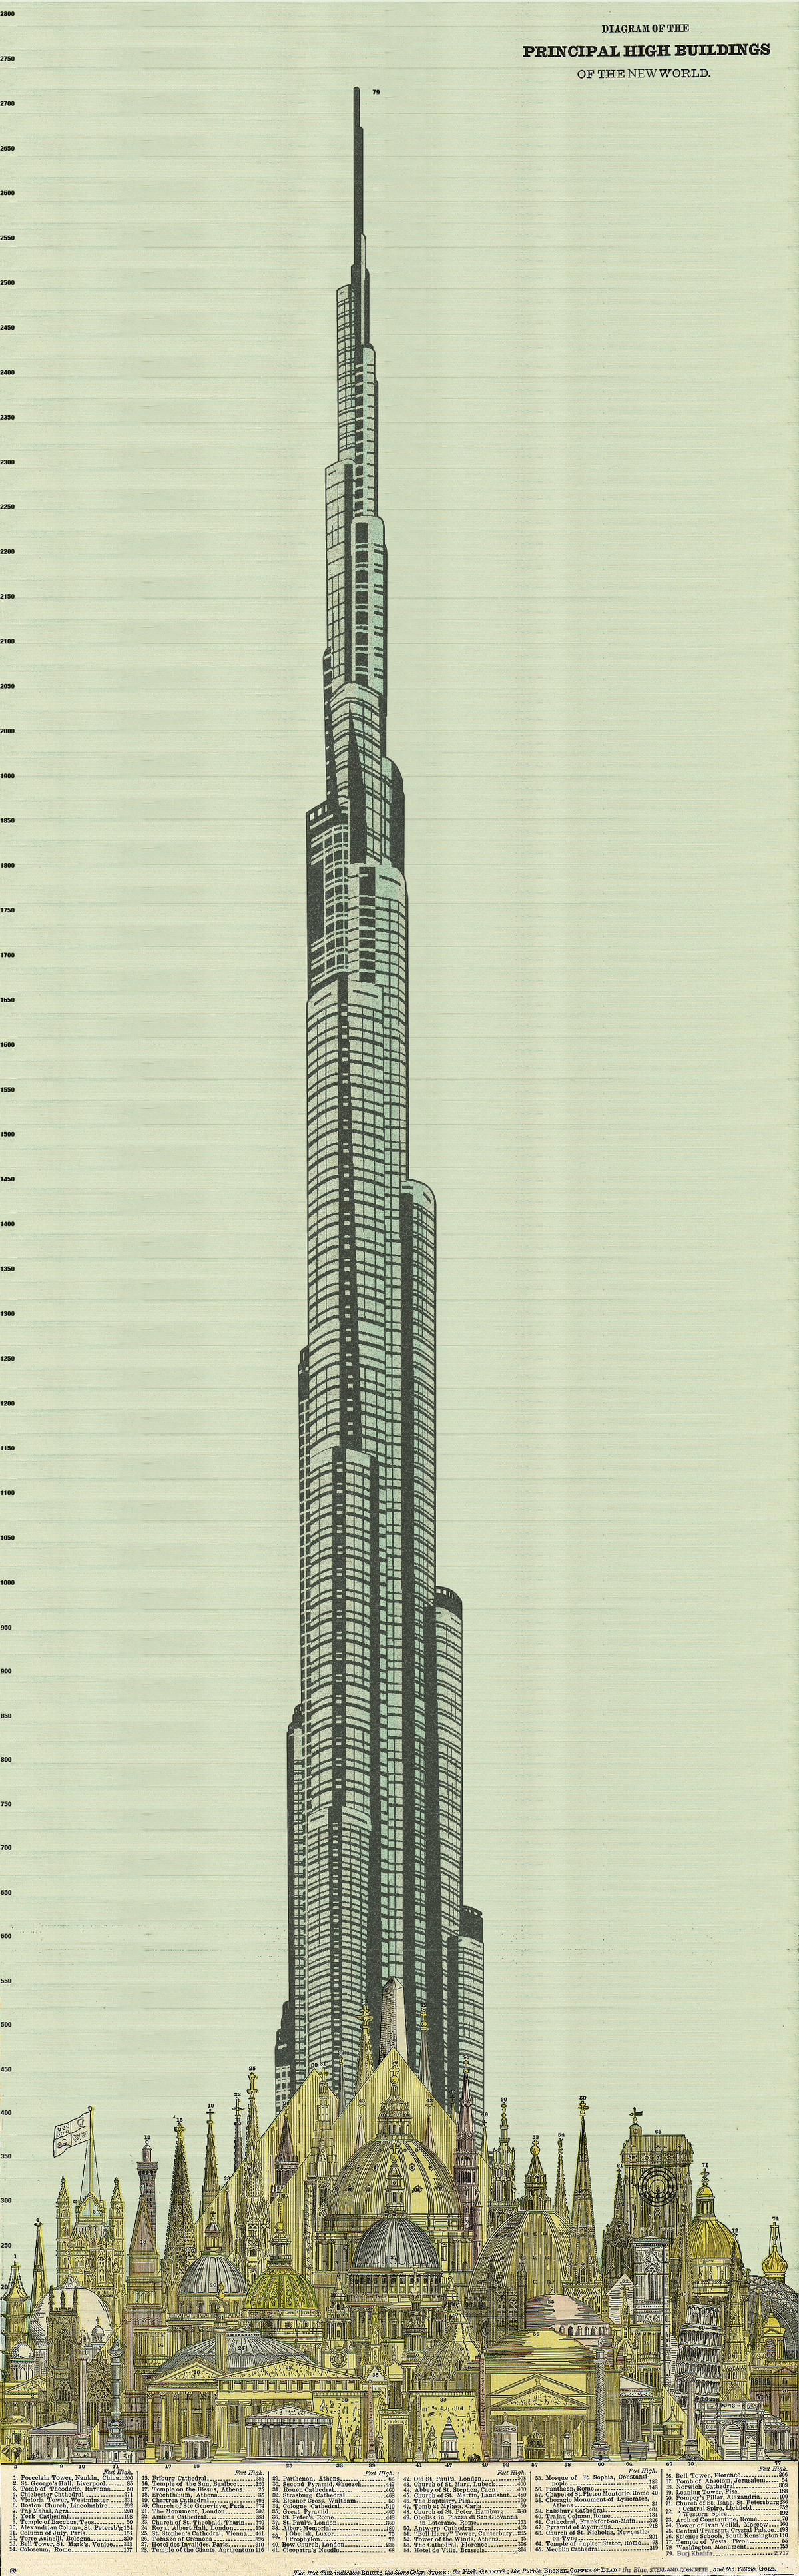 The tallest buildings with the Burj Khalifa added in.